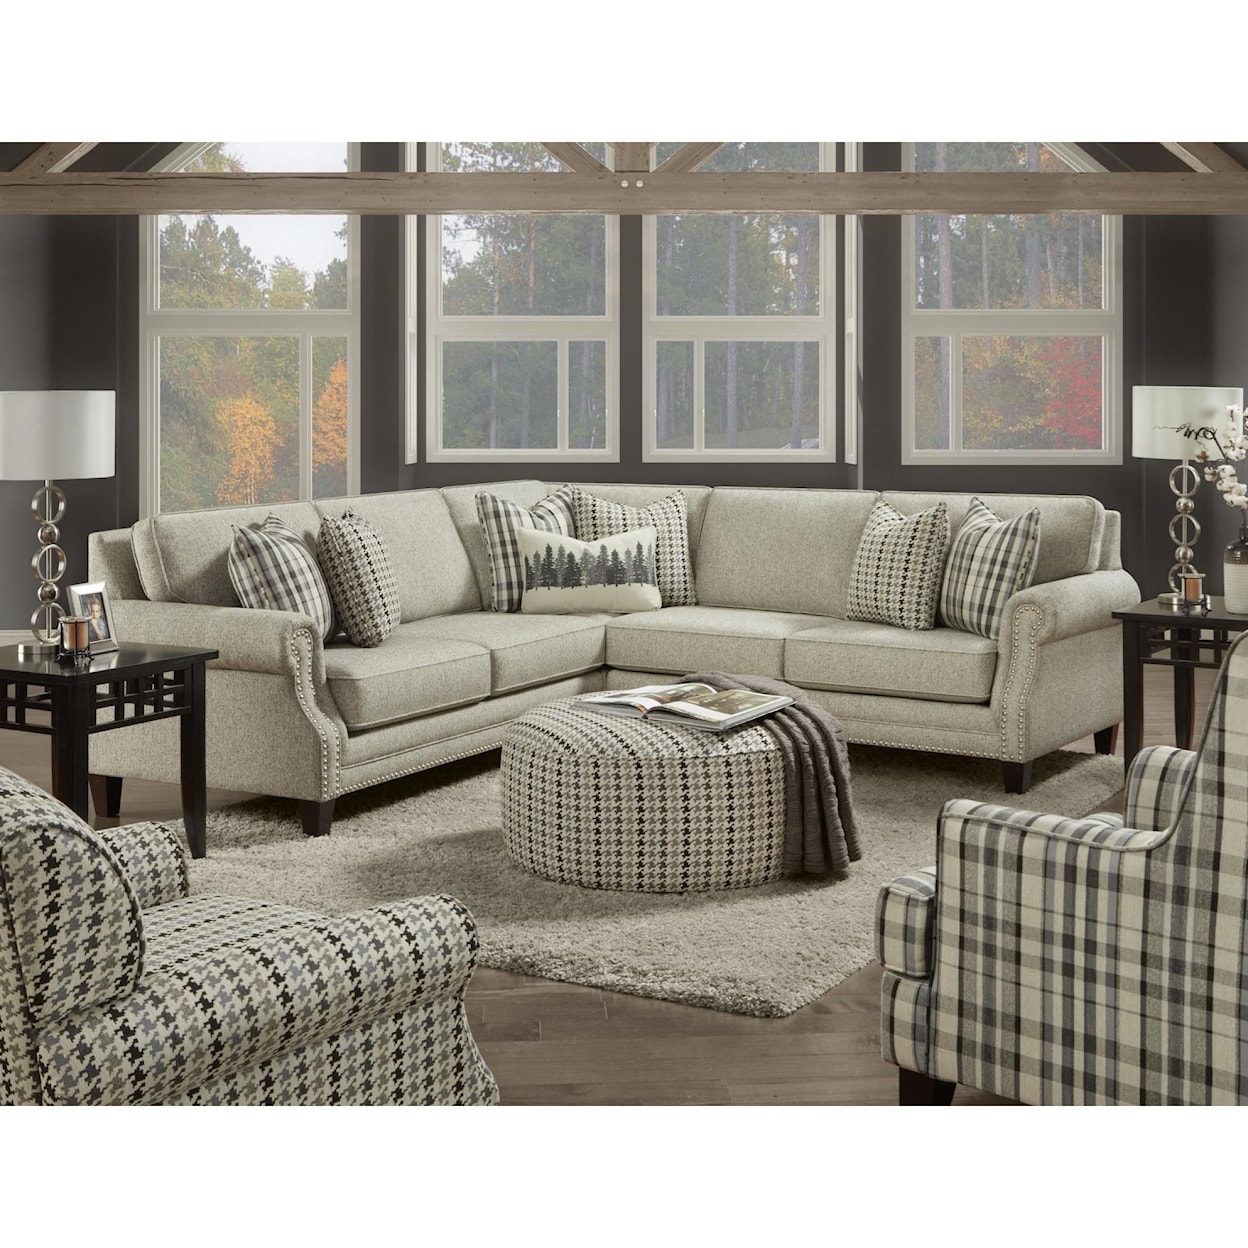 Fusion Furniture 2530 Living Room Group